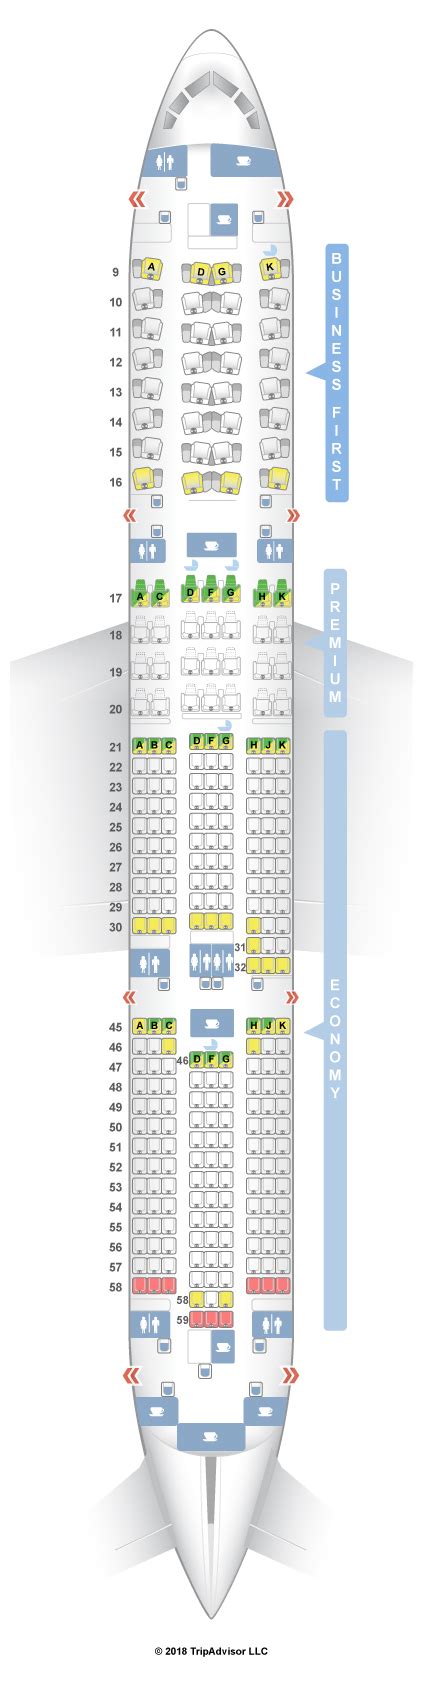 Qantas Boeing Seating Chart Images And Photos Finder